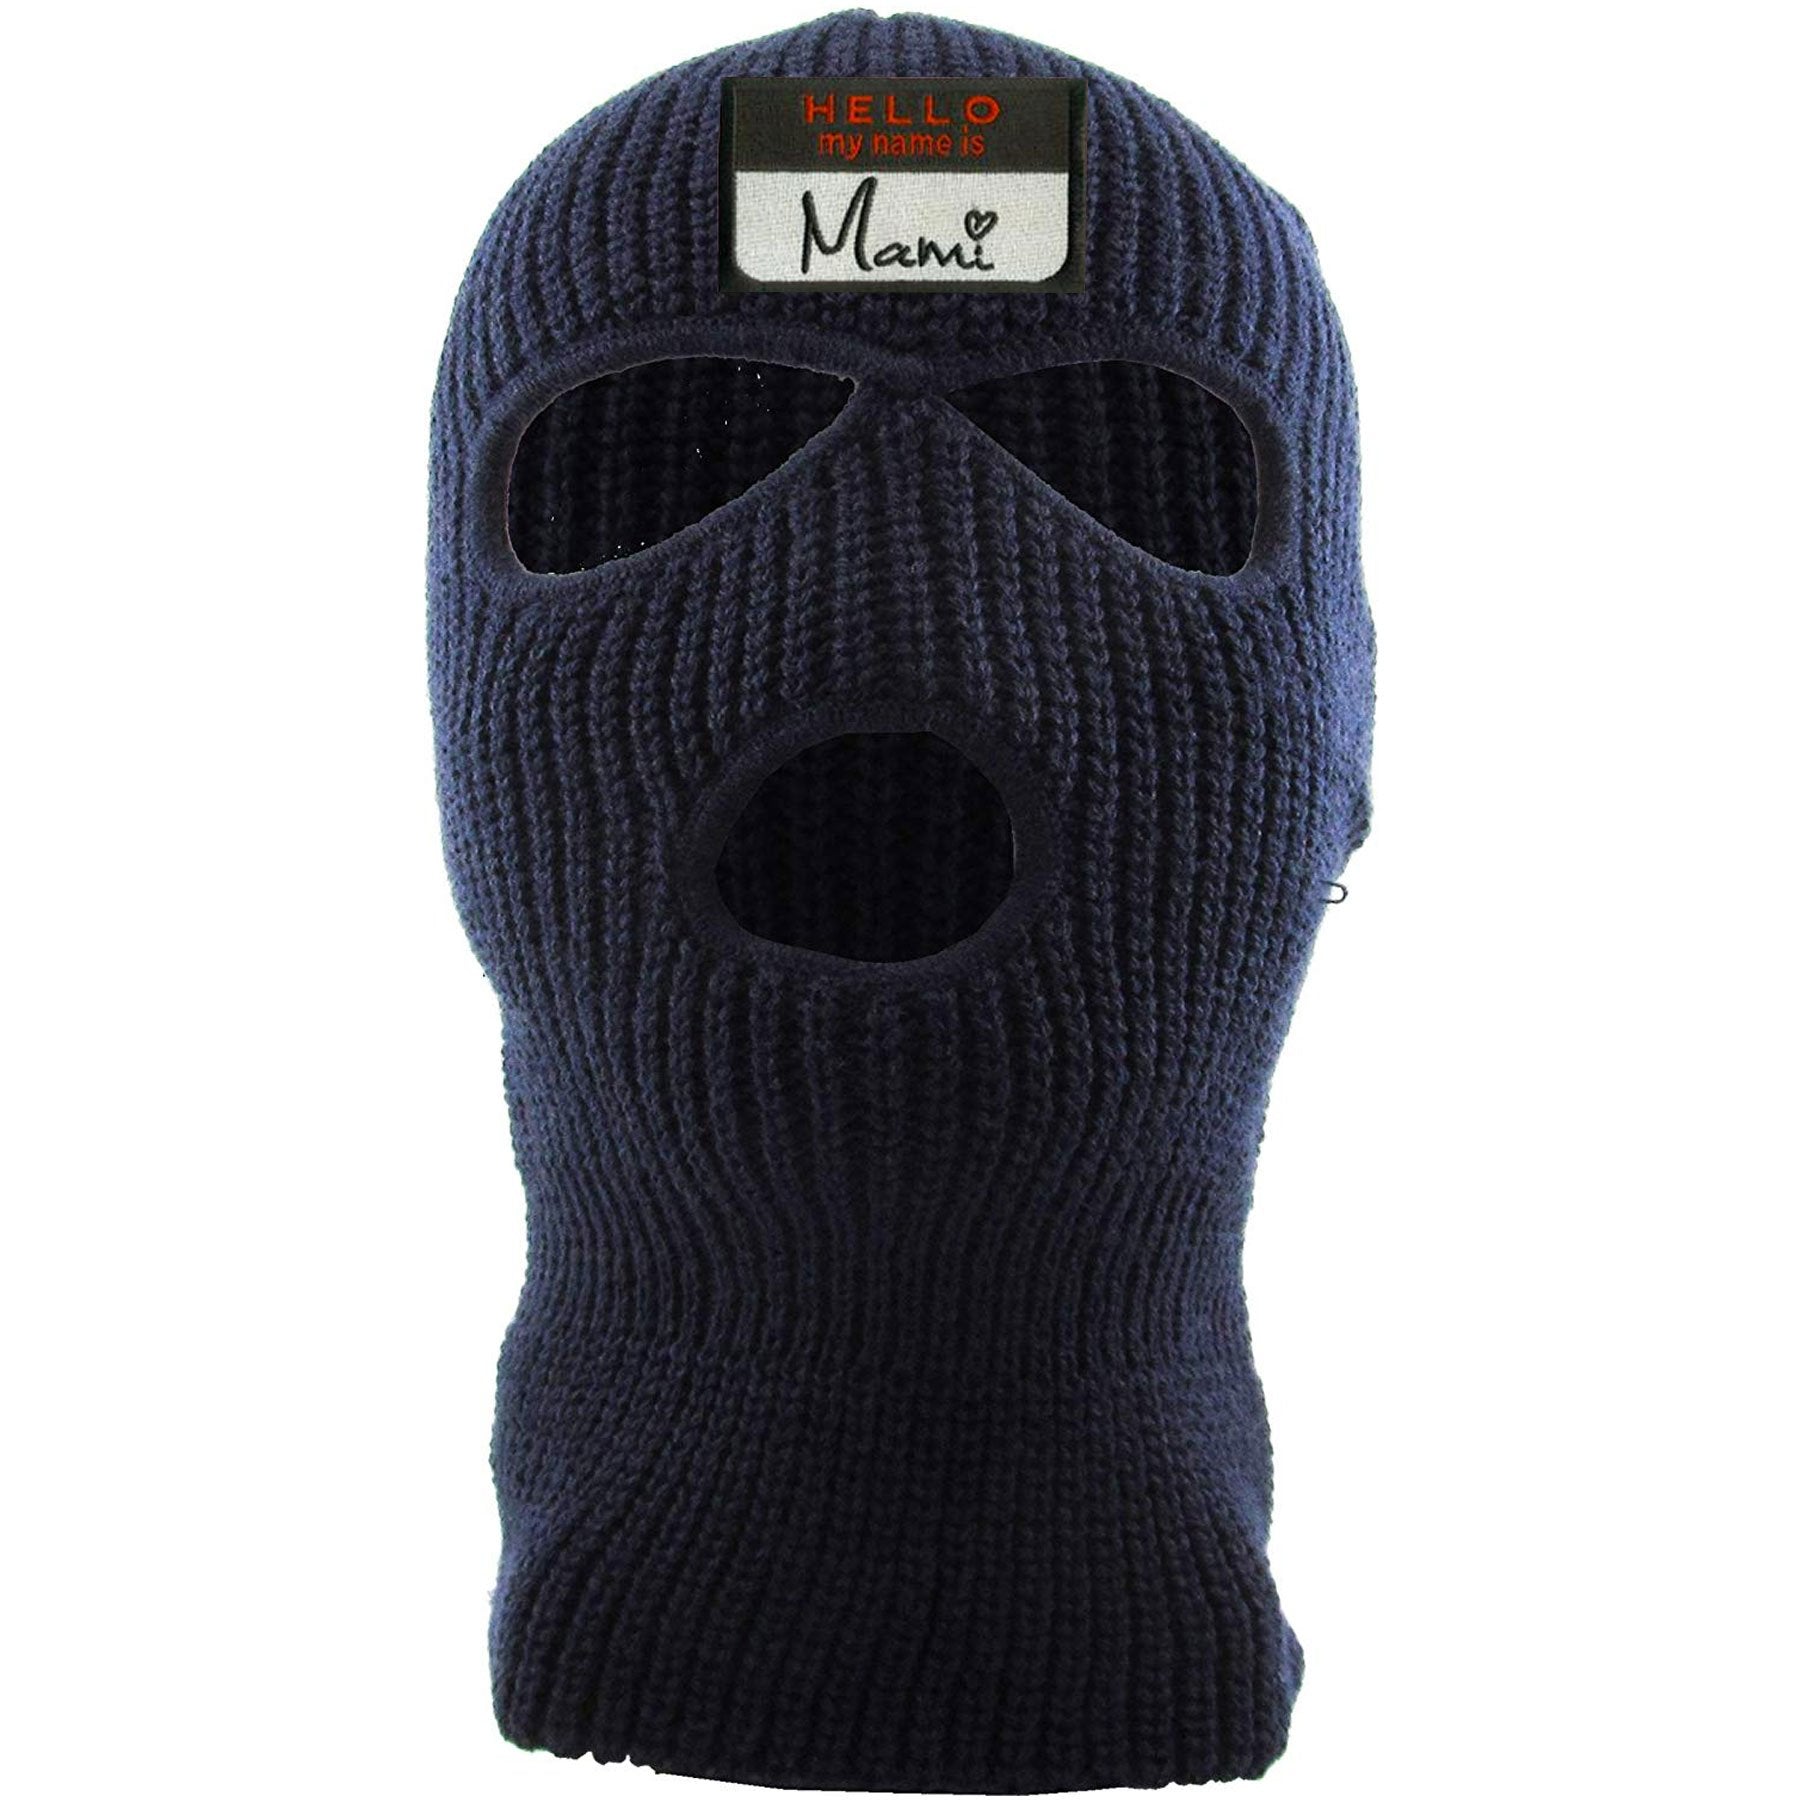 Embroidered on the front of the navy blue hello my name is mami ski mask is the hello my name is mami logo embroidered in black, white, and red